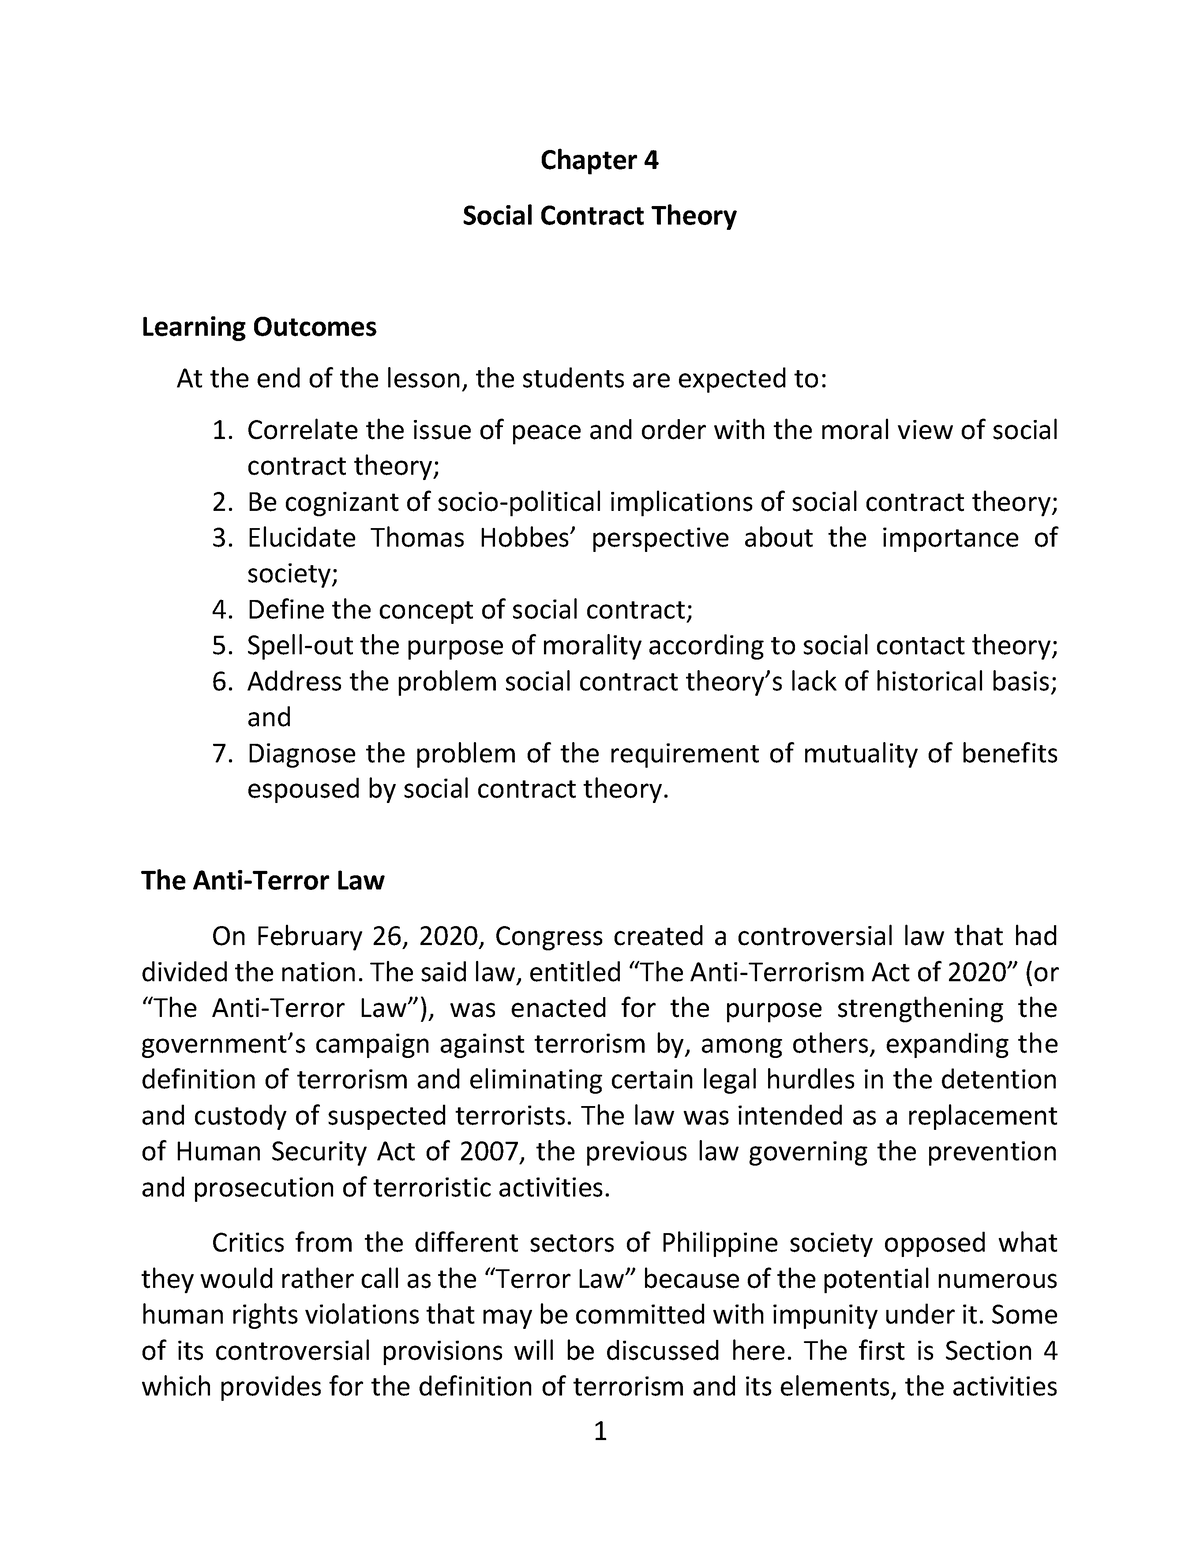 essay question on social contract theory